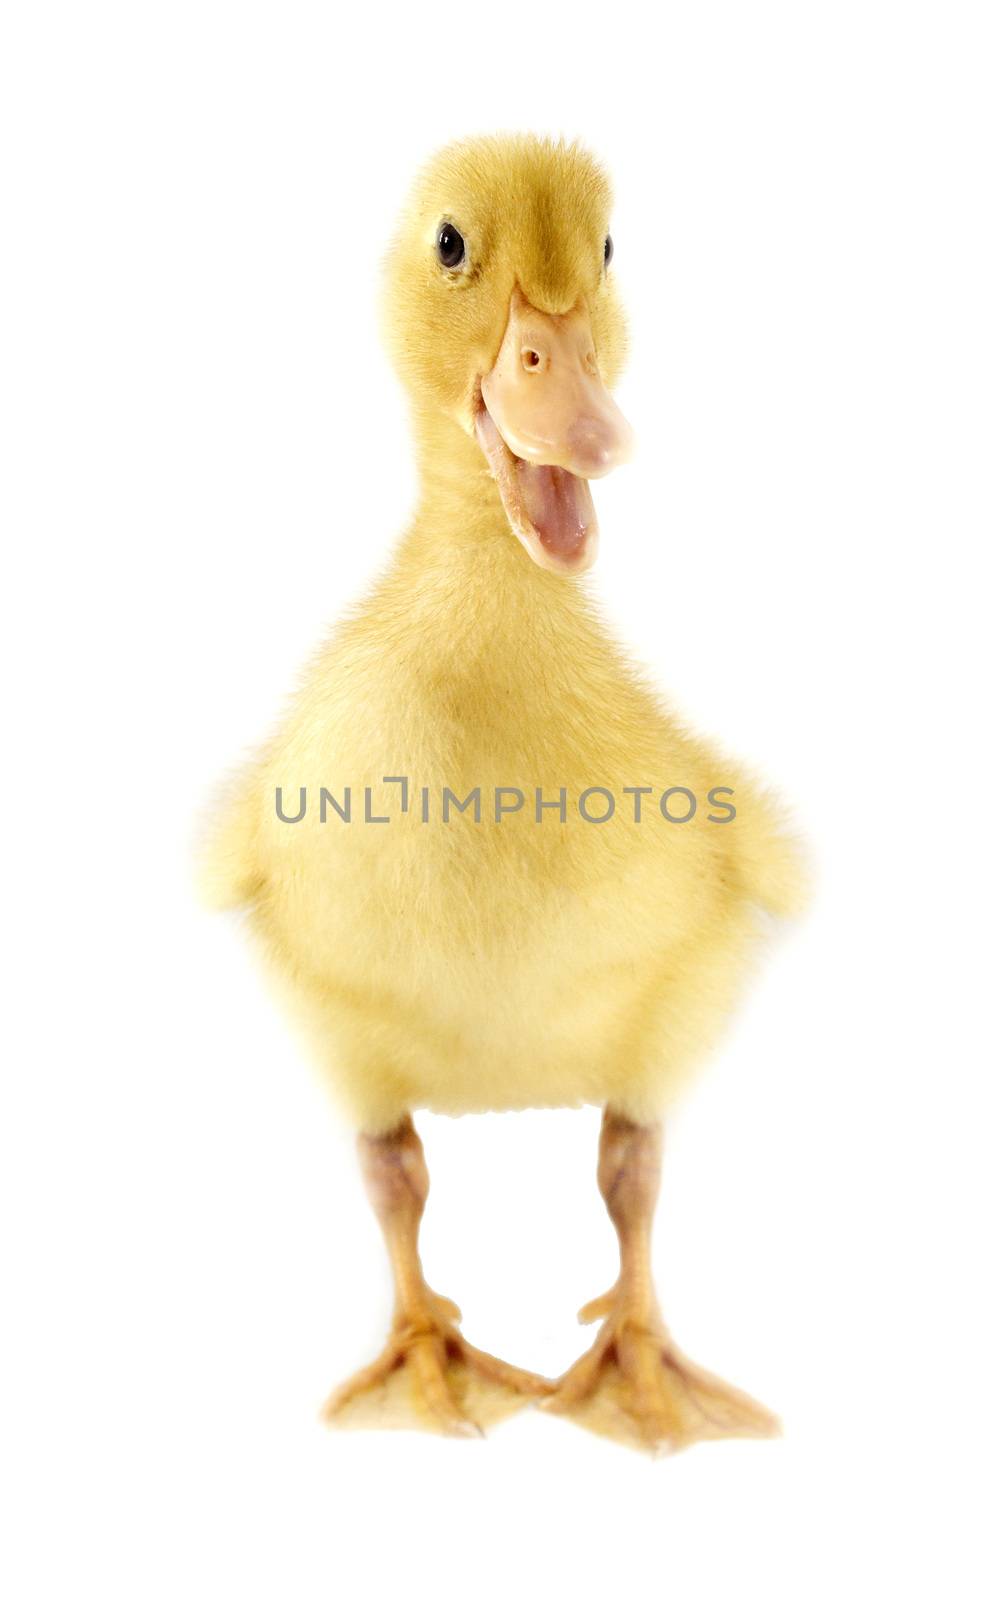 Funny yellow Duckling by designsstock